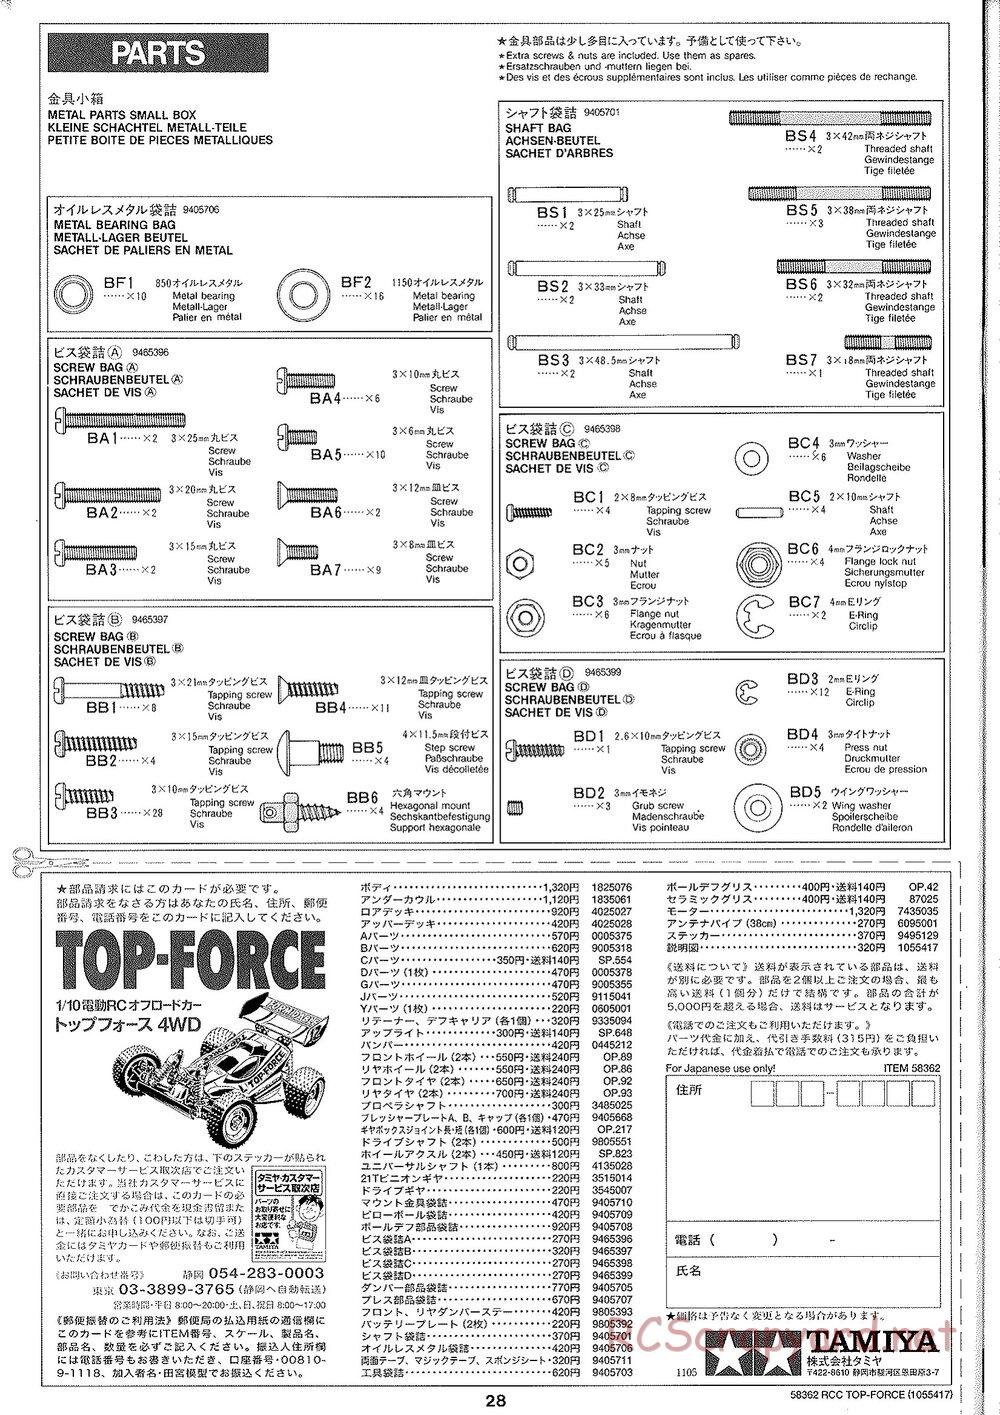 Tamiya - Top Force 2005 - DF-01 Chassis - Manual - Page 28